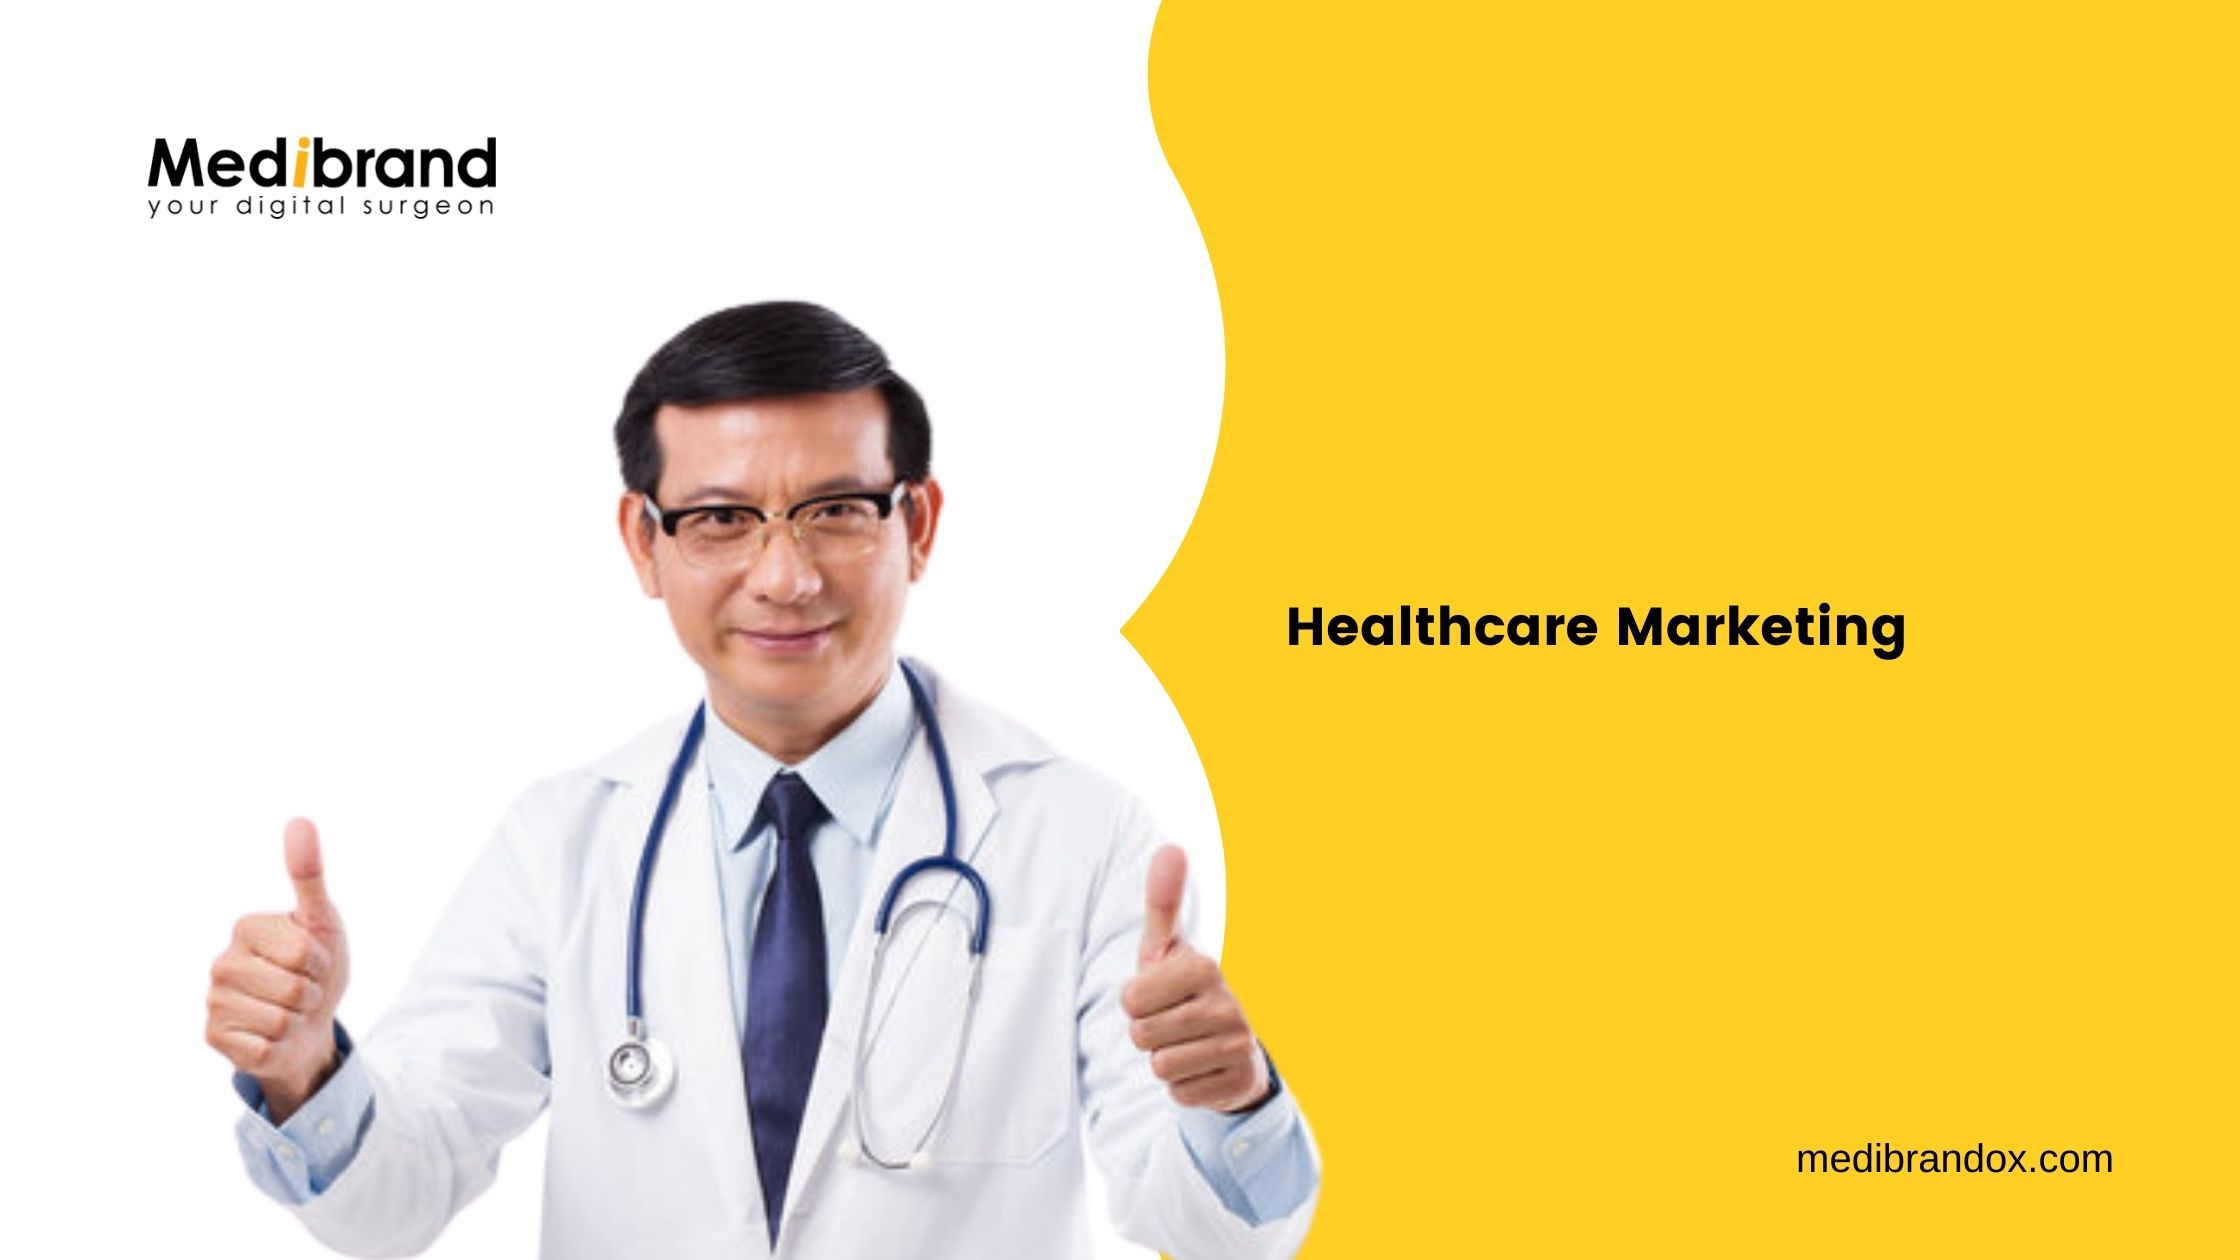 Article about Healthcare Marketing Company Helps Medical Firms